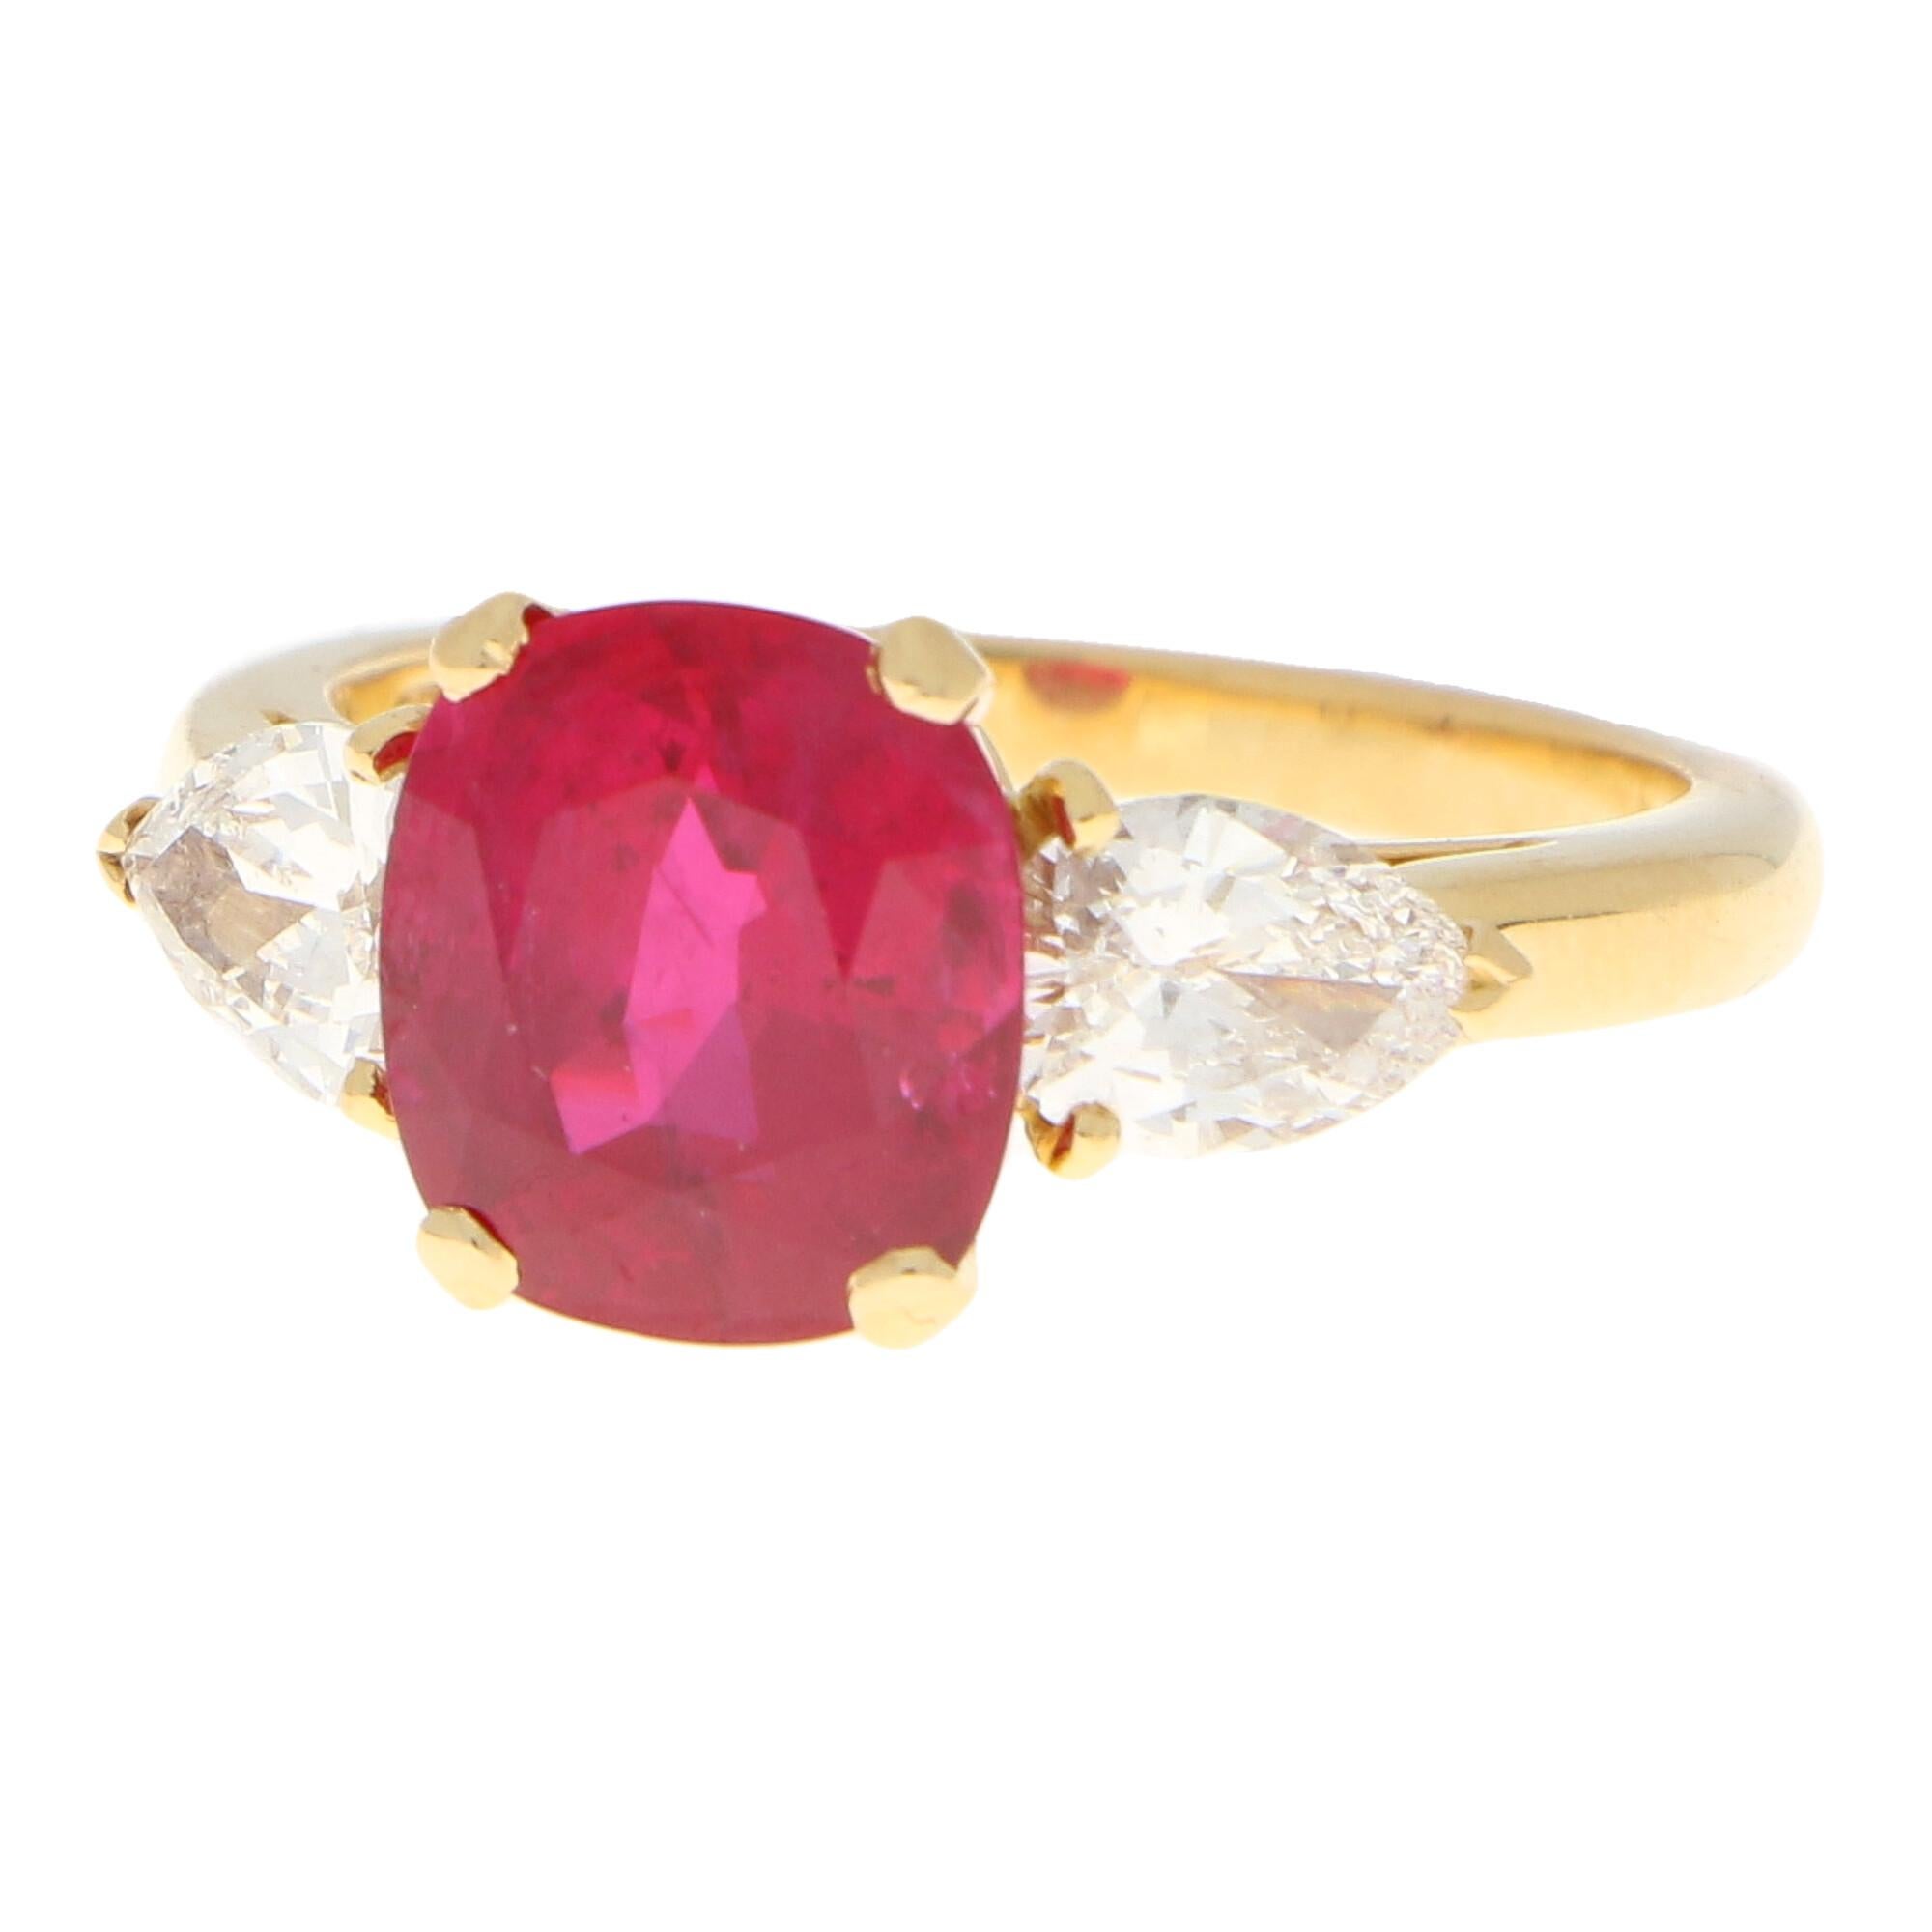 A truly stunning certificated Burmese ruby and diamond three stone engagement ring set in 18k yellow gold.

The ring is centrally set with a beautiful 3.58 carat hand-cut cushion shaped Burmese ruby which is securely four claw set in an elegant open